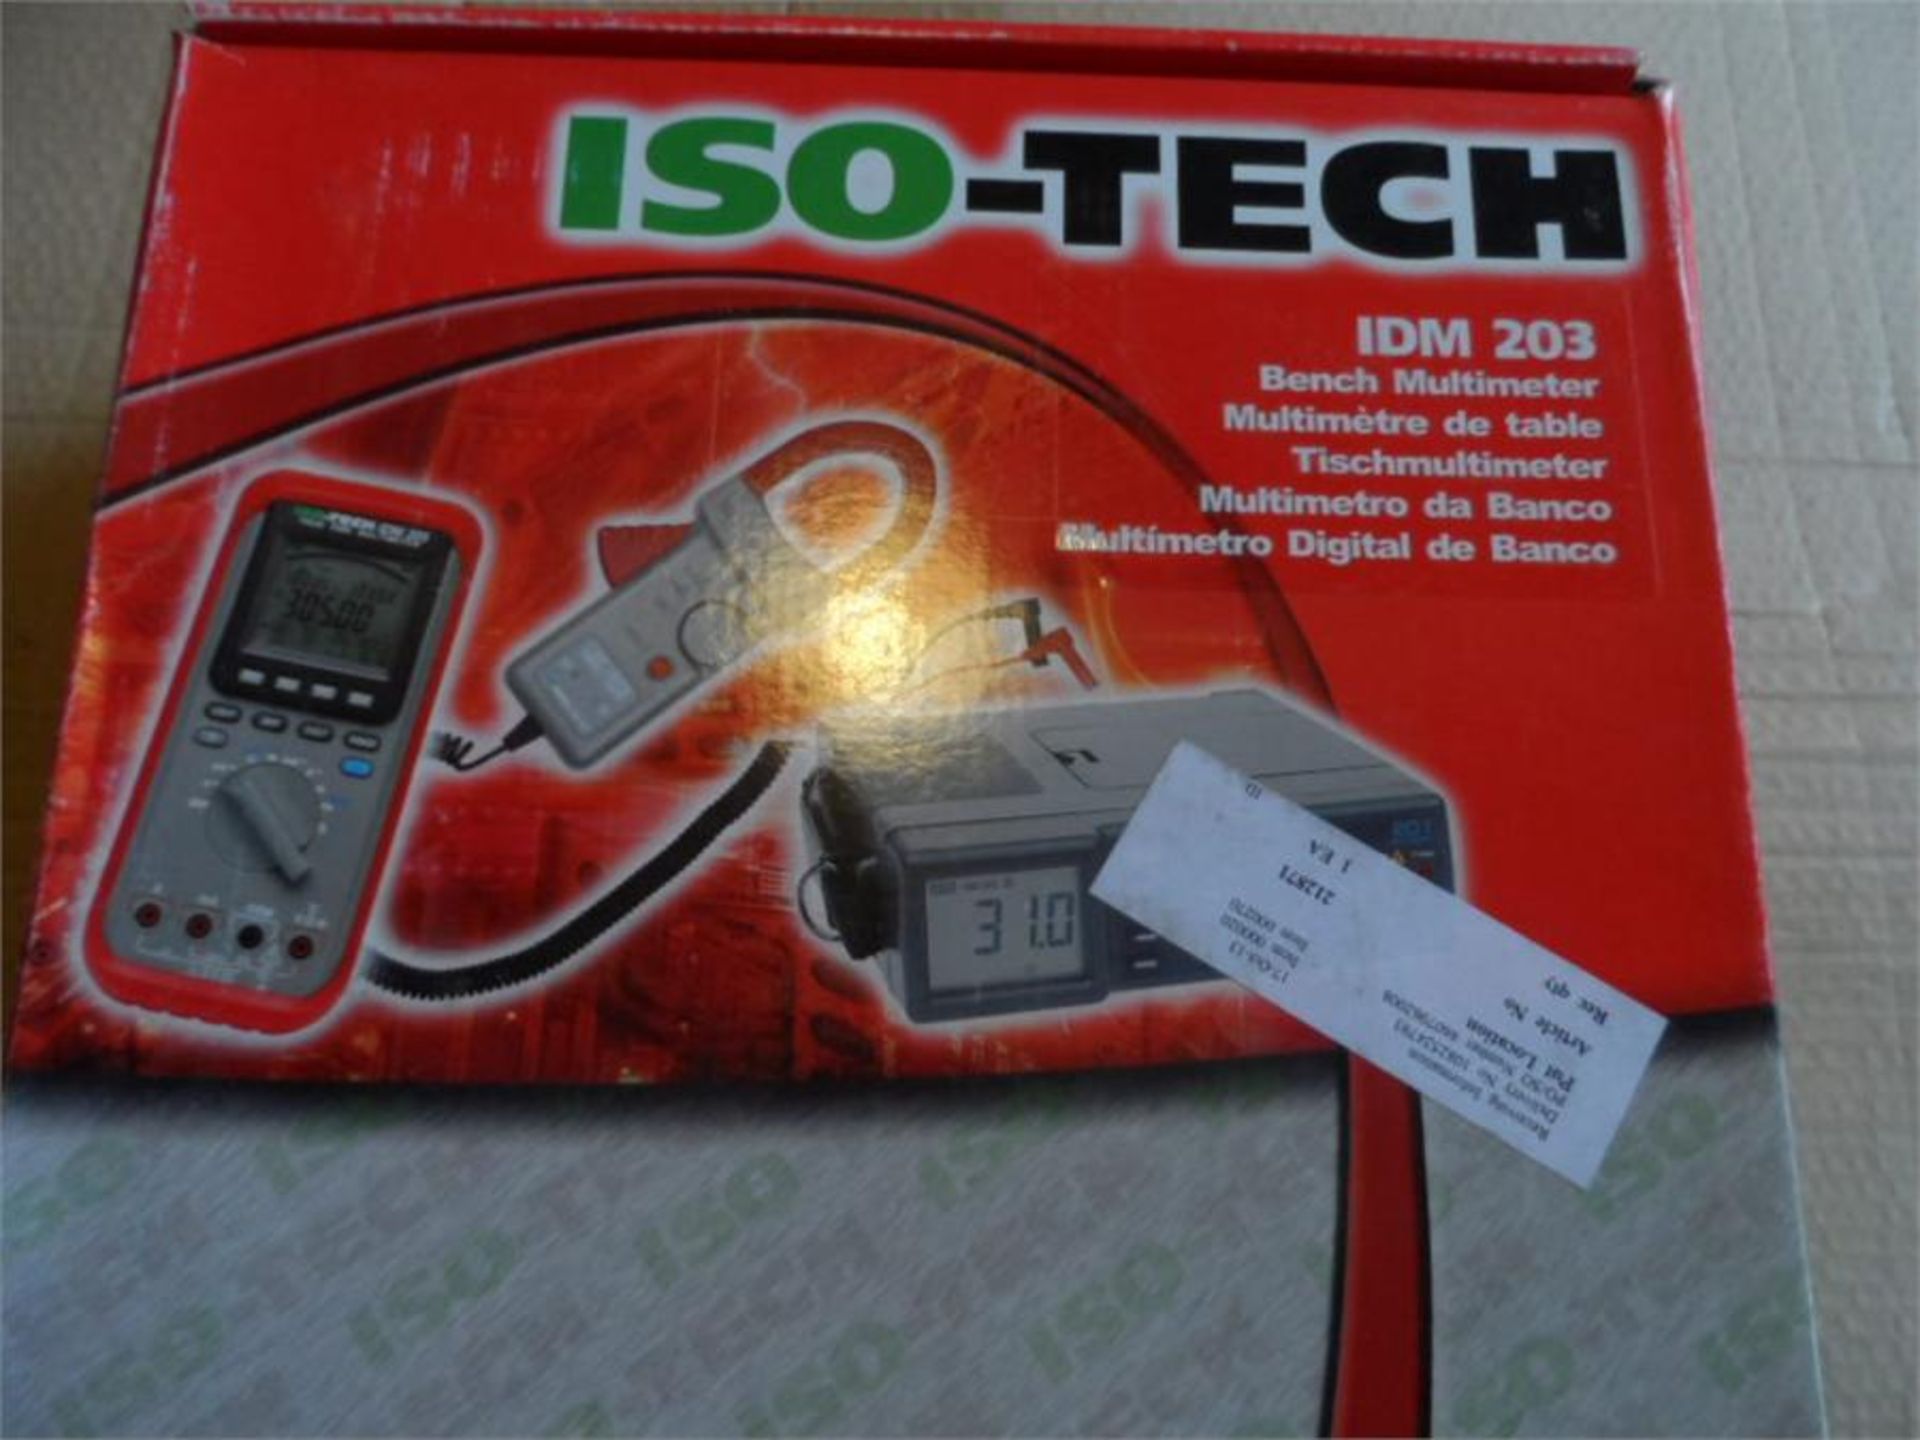 ISOTECH Bench Multimeter - IDM203 - 212871 - Image 2 of 4